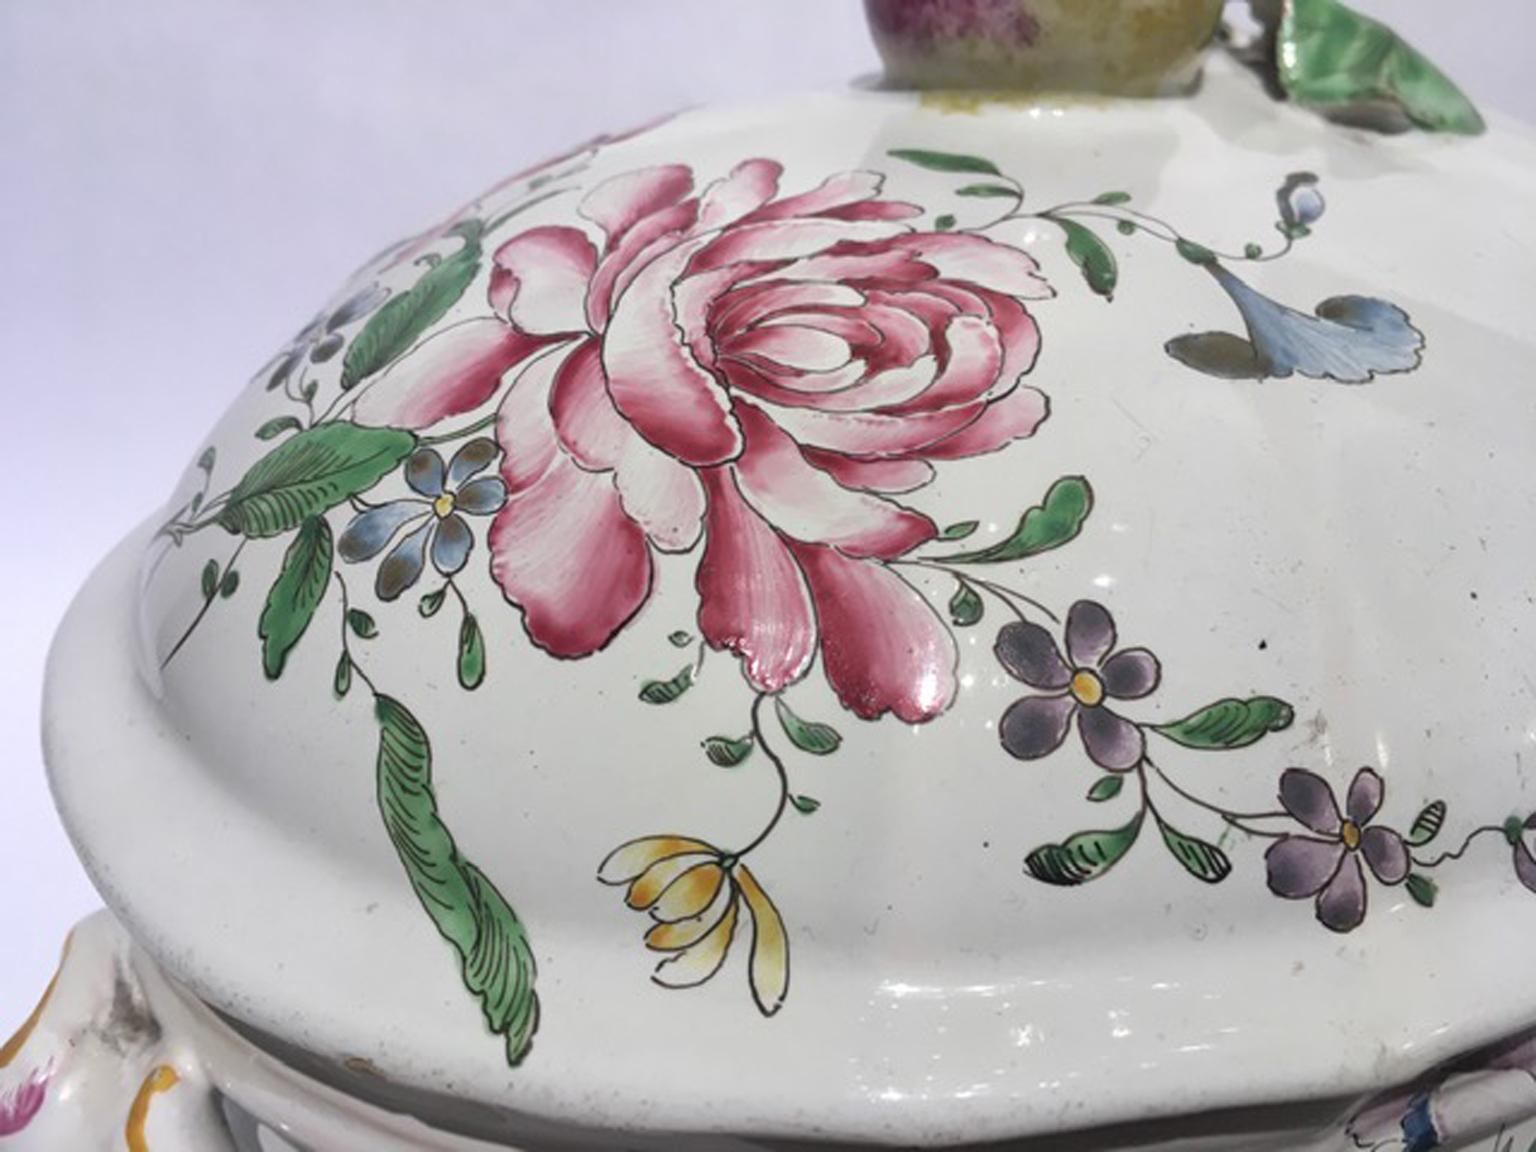 XVIIIe siècle France Mid-18th Century Porcelain Soup Bowl Flowers and Fruits Drawings en vente